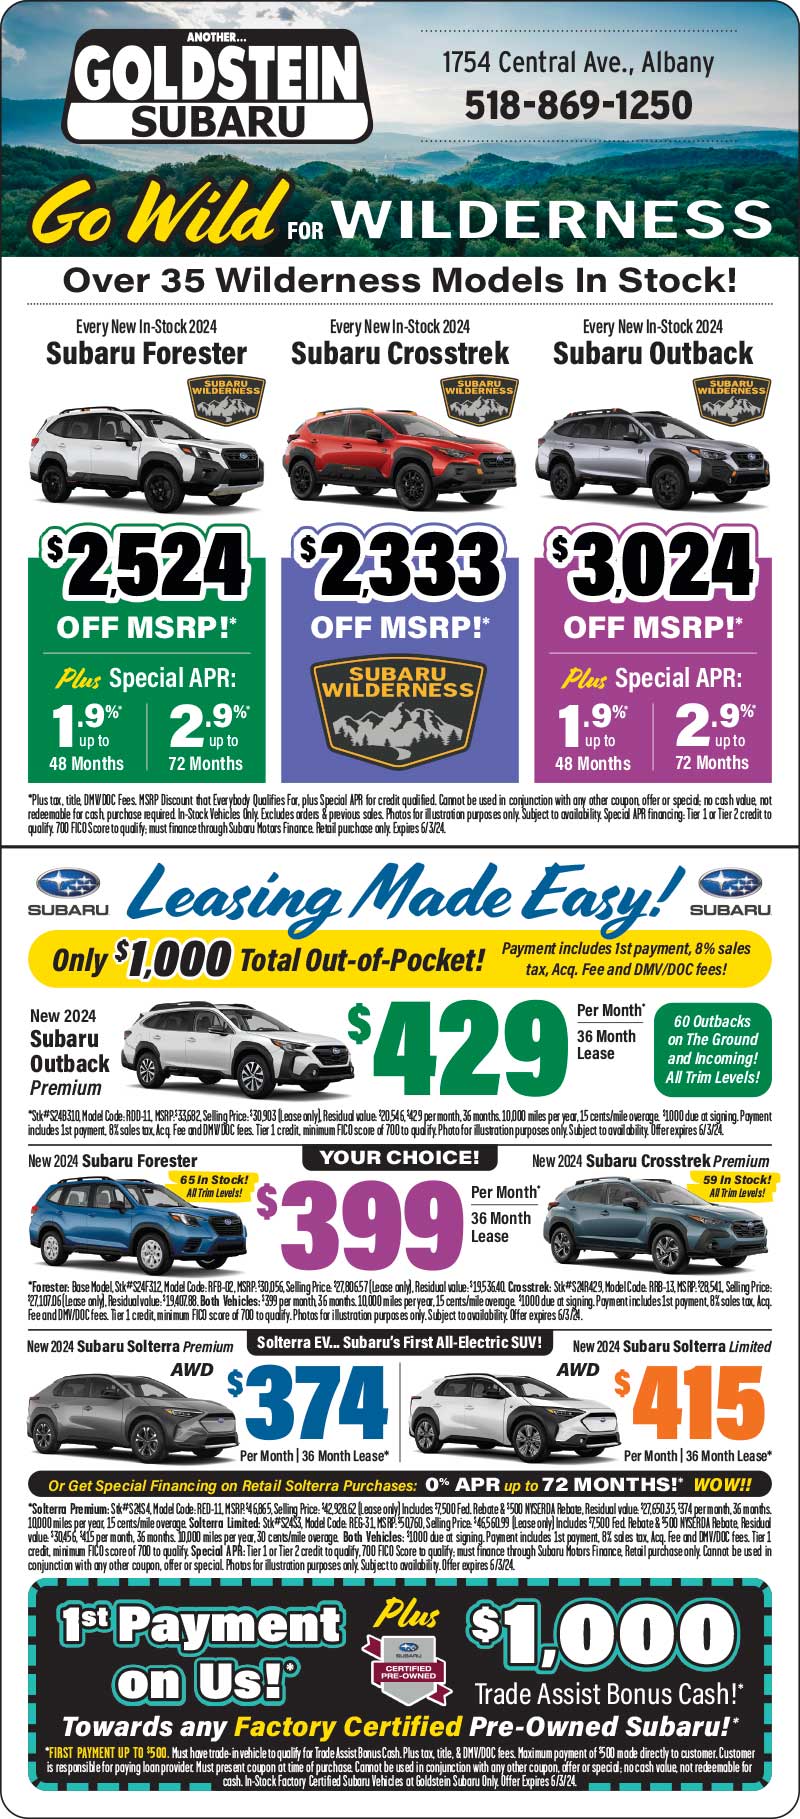 Goldstein Subaru Print Specials from the paper!